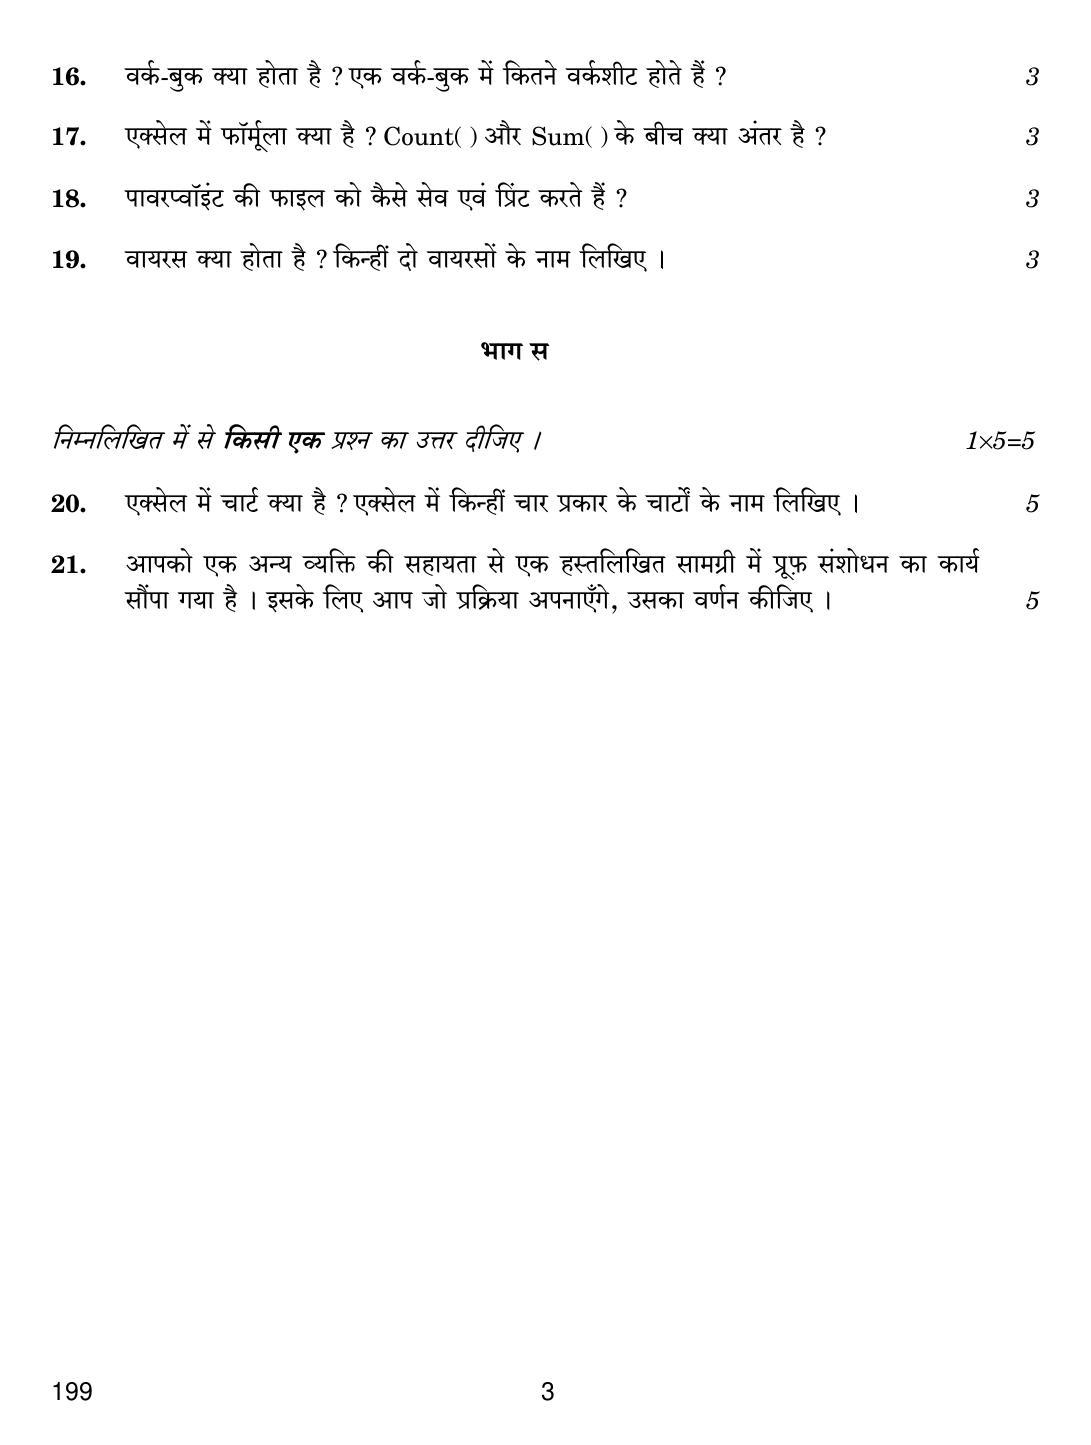 CBSE Class 12 199 Typography & Computer Application (Hindi) 2019 Question Paper - Page 3